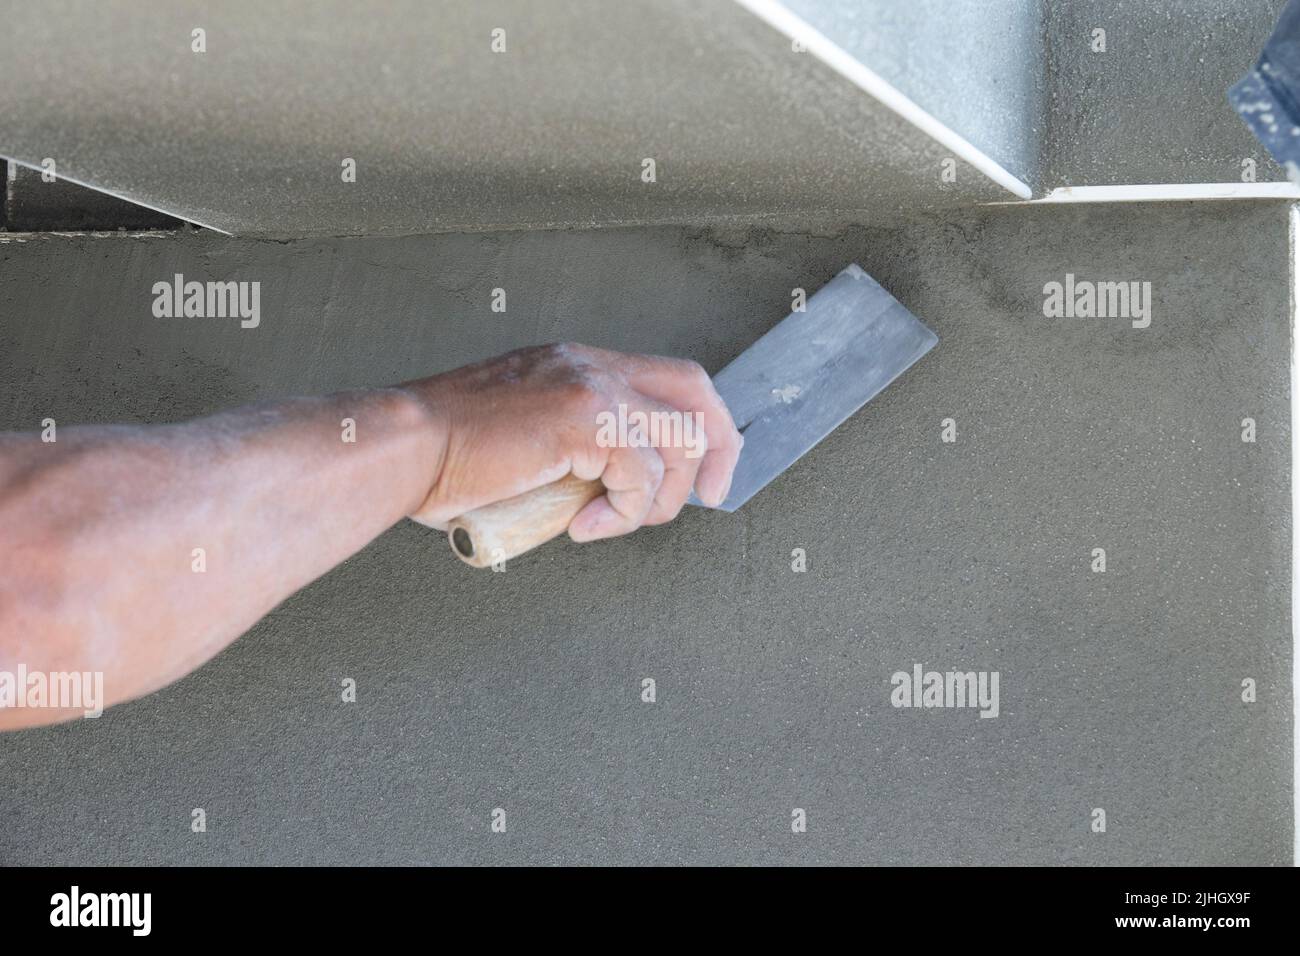 Skilled construction worker finishing a wall of stucco with a trowel and smoothing out little uneven areas. Affordable Housing Stock Photo